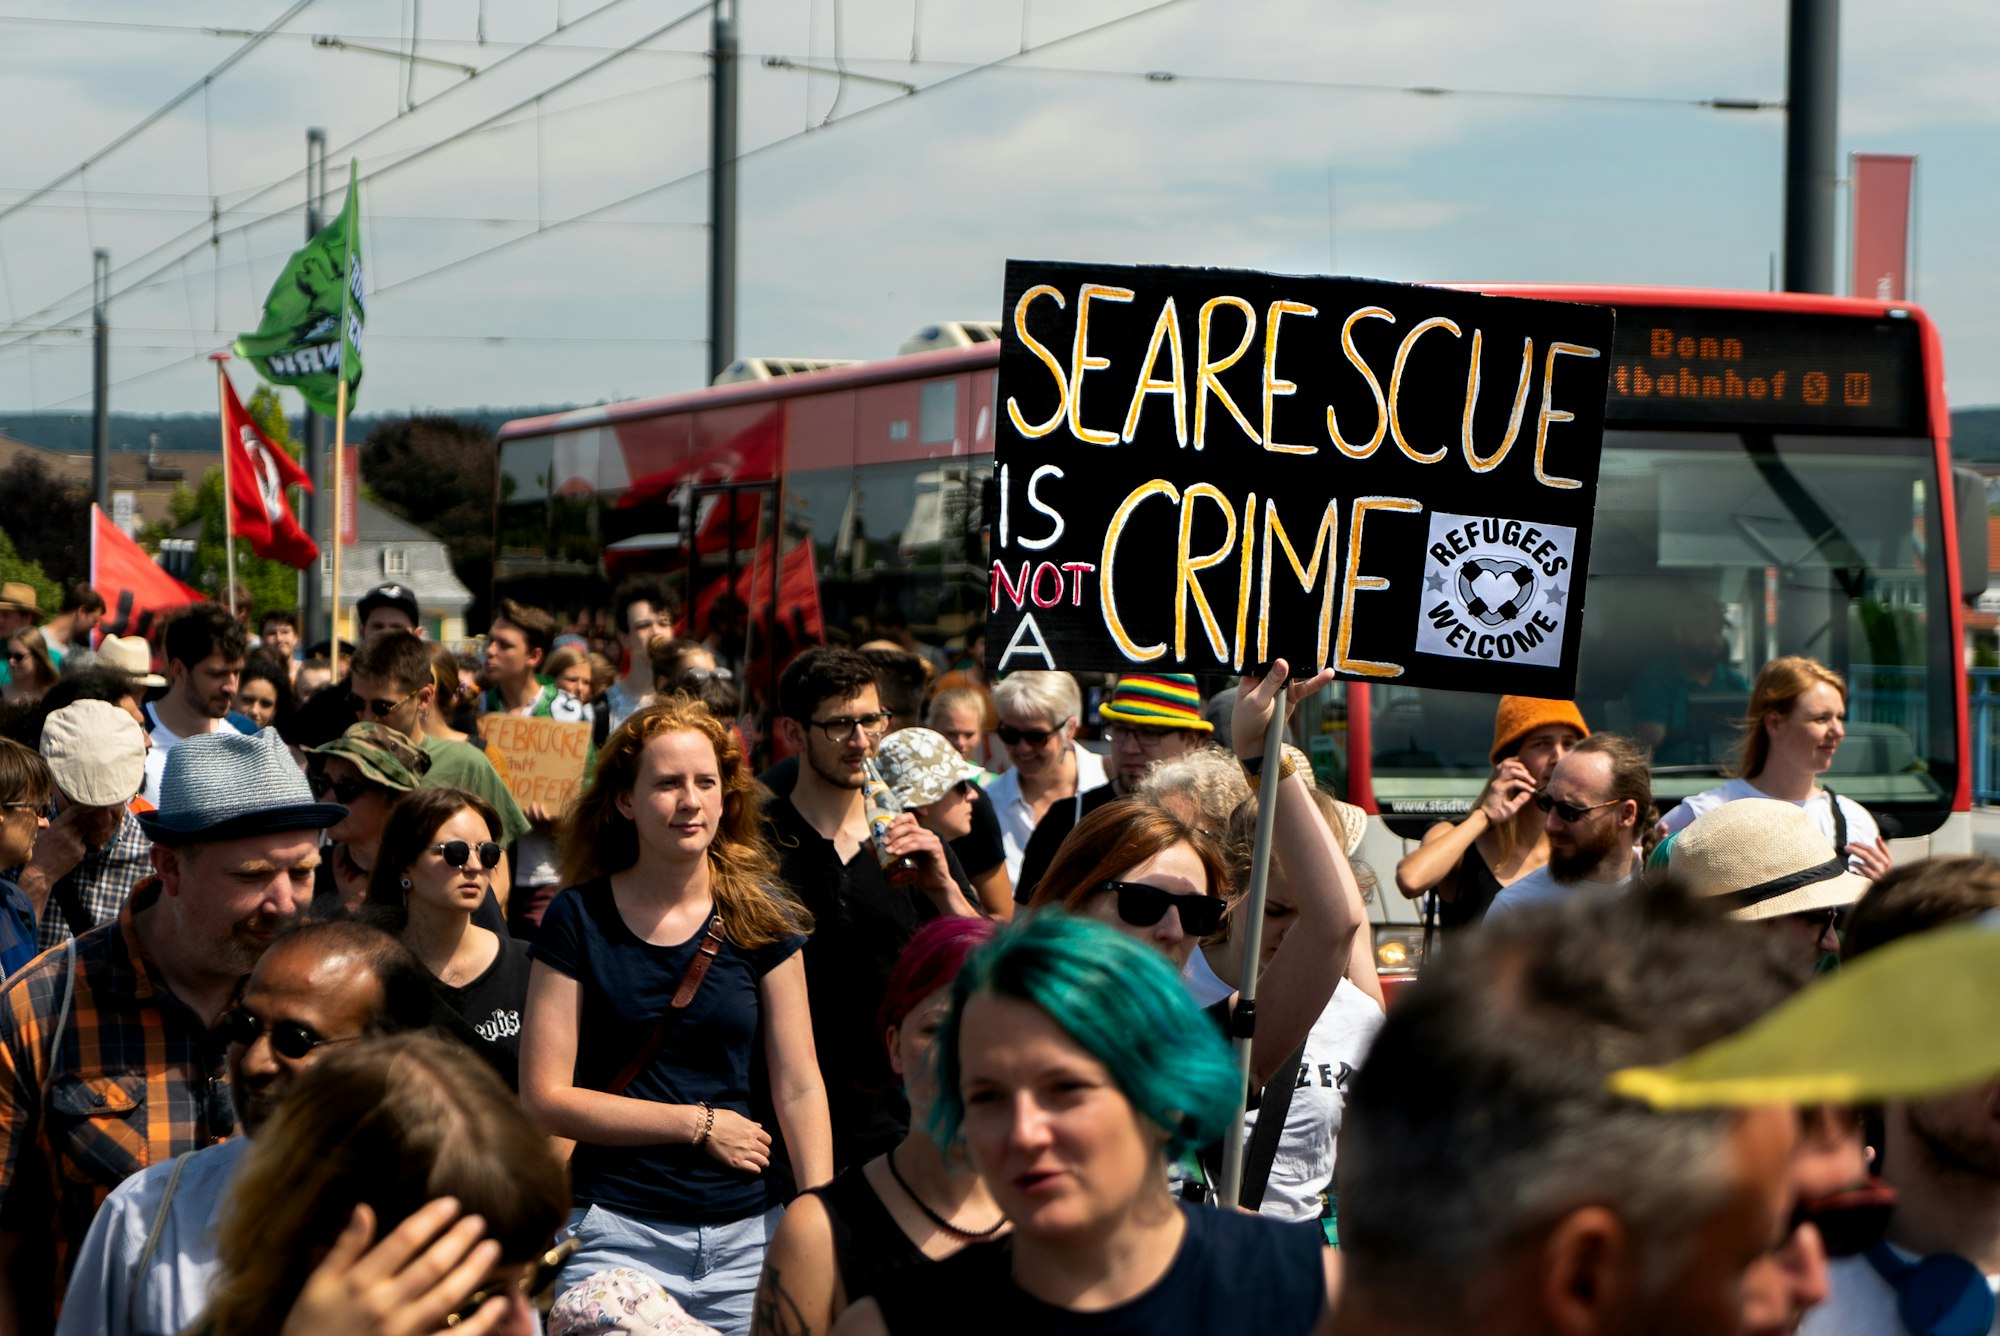 Sea Rescue is not a crime! 